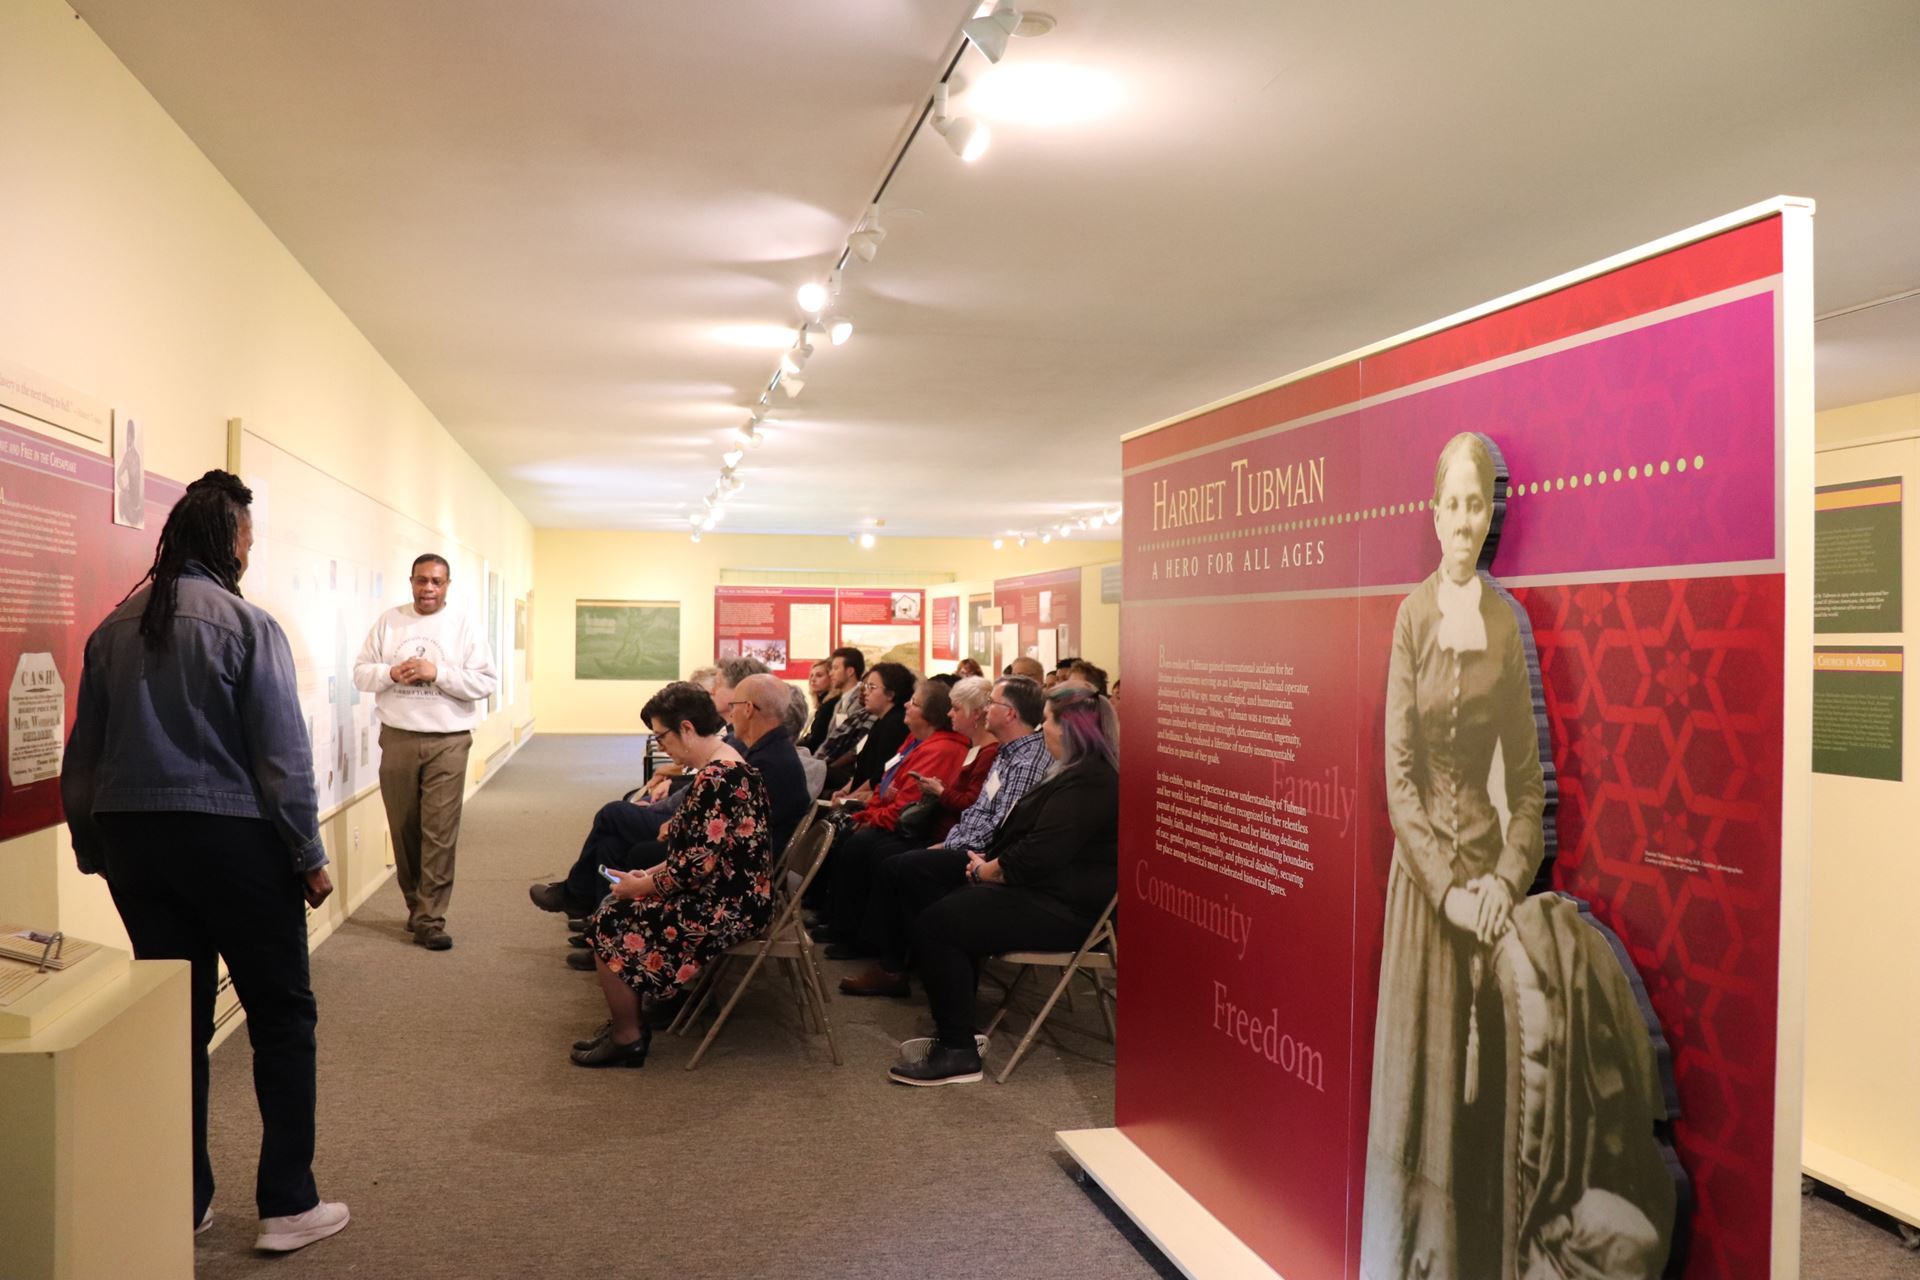 Thank you to the Harriet Tubman House, the @sewardhousemuseum, and the @equalrightsheritage for hosting our Central NY Meet-Up! We’re halfway through our Fall 2019 Workshop and Meet-Up tour around New York State. Learn where MANY will be next and we will see you on the road! 